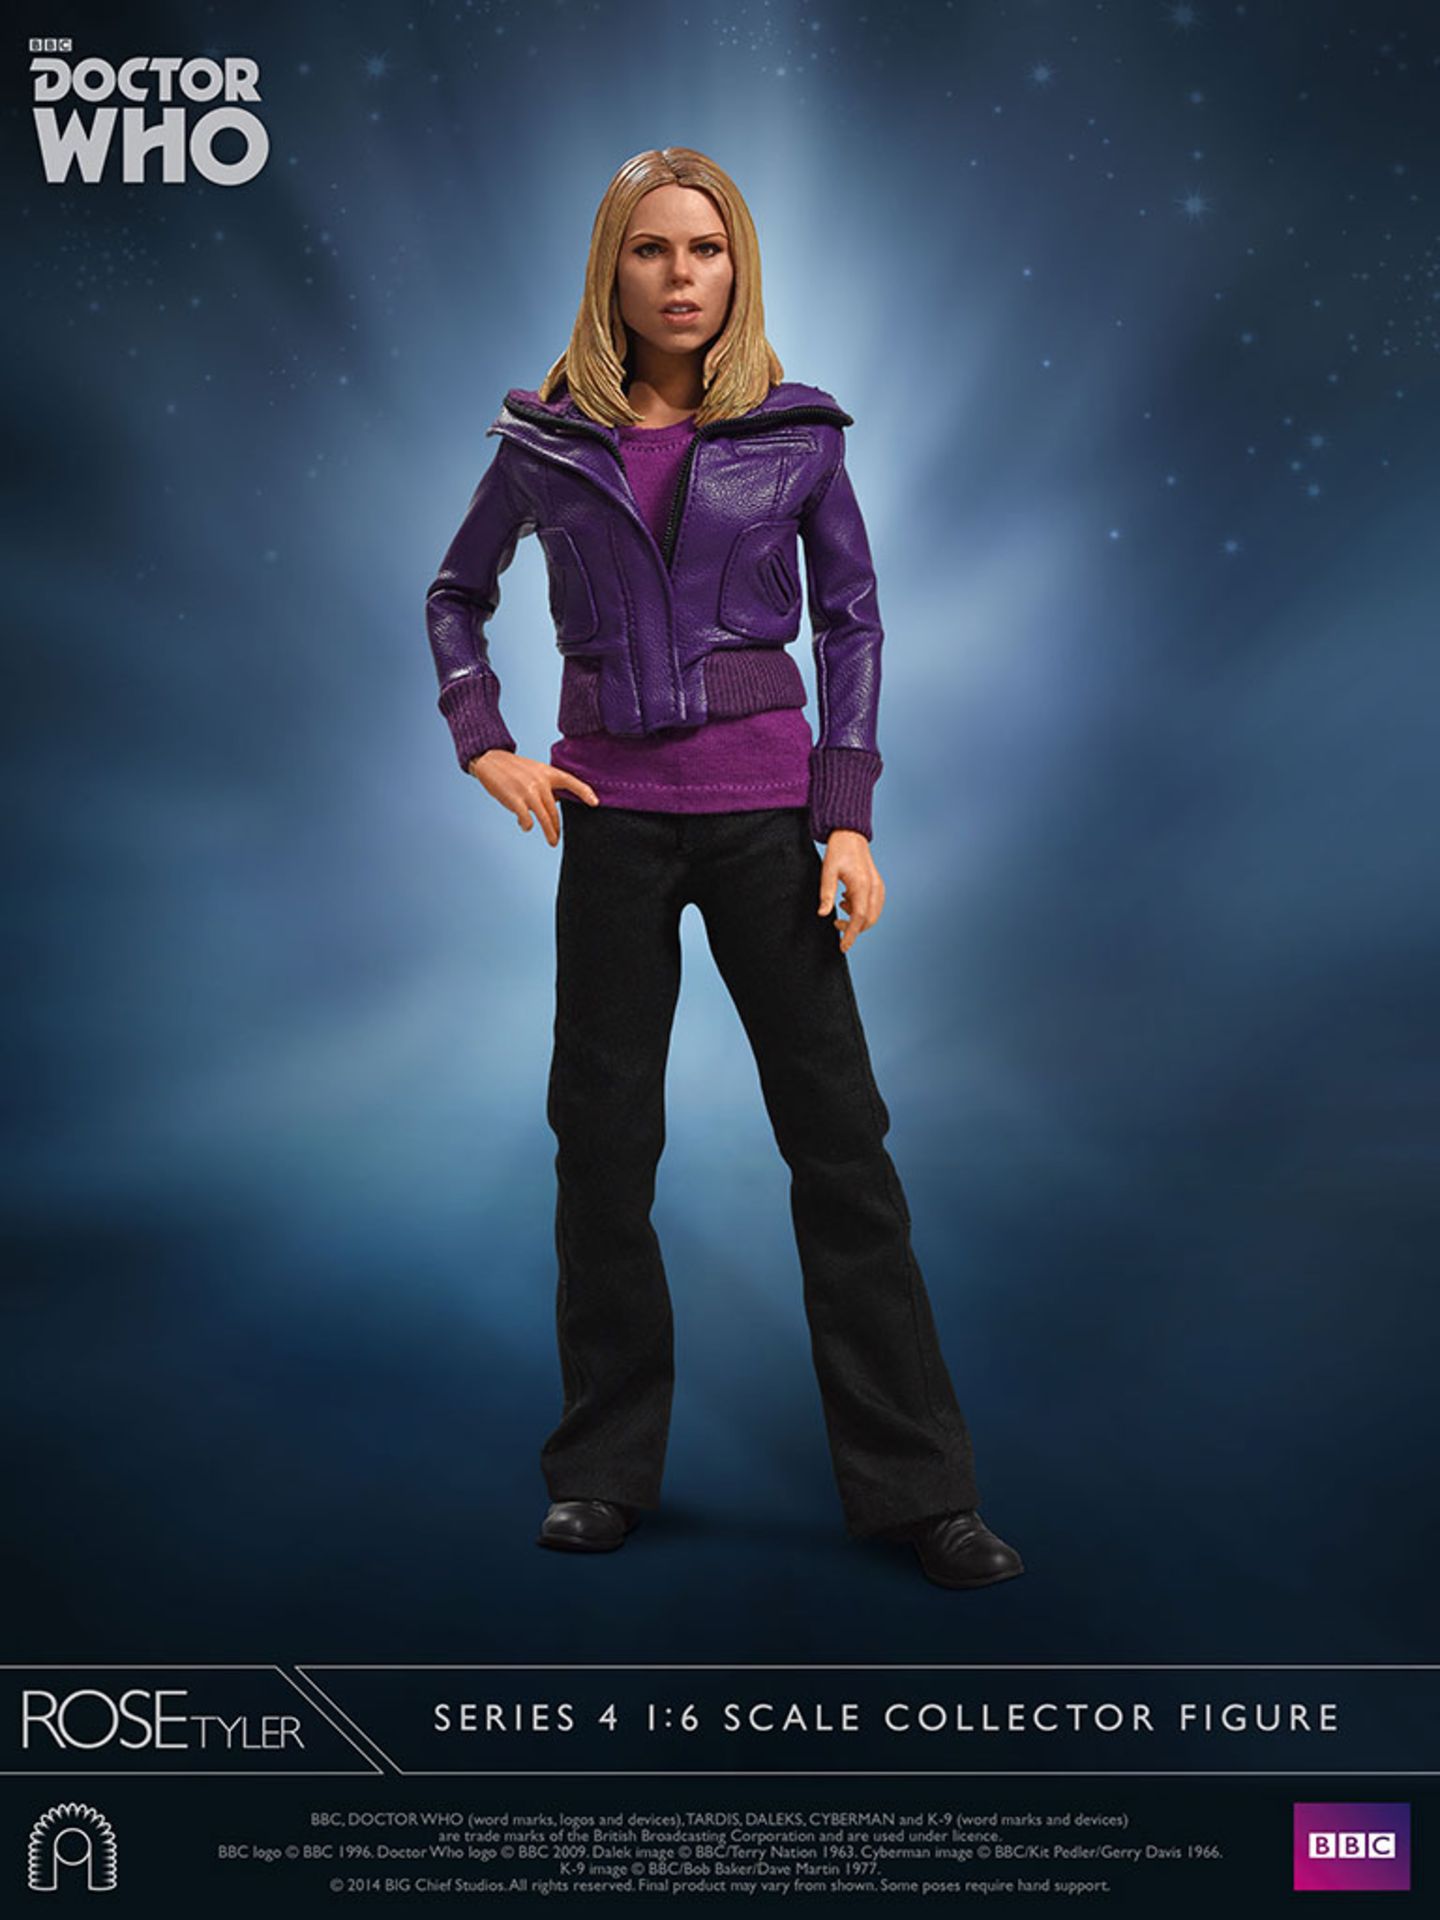 DOCTOR WHO - BIG CHIEF STUDIOS - ROSE TYLER SIGNATURE EDITION 1/6